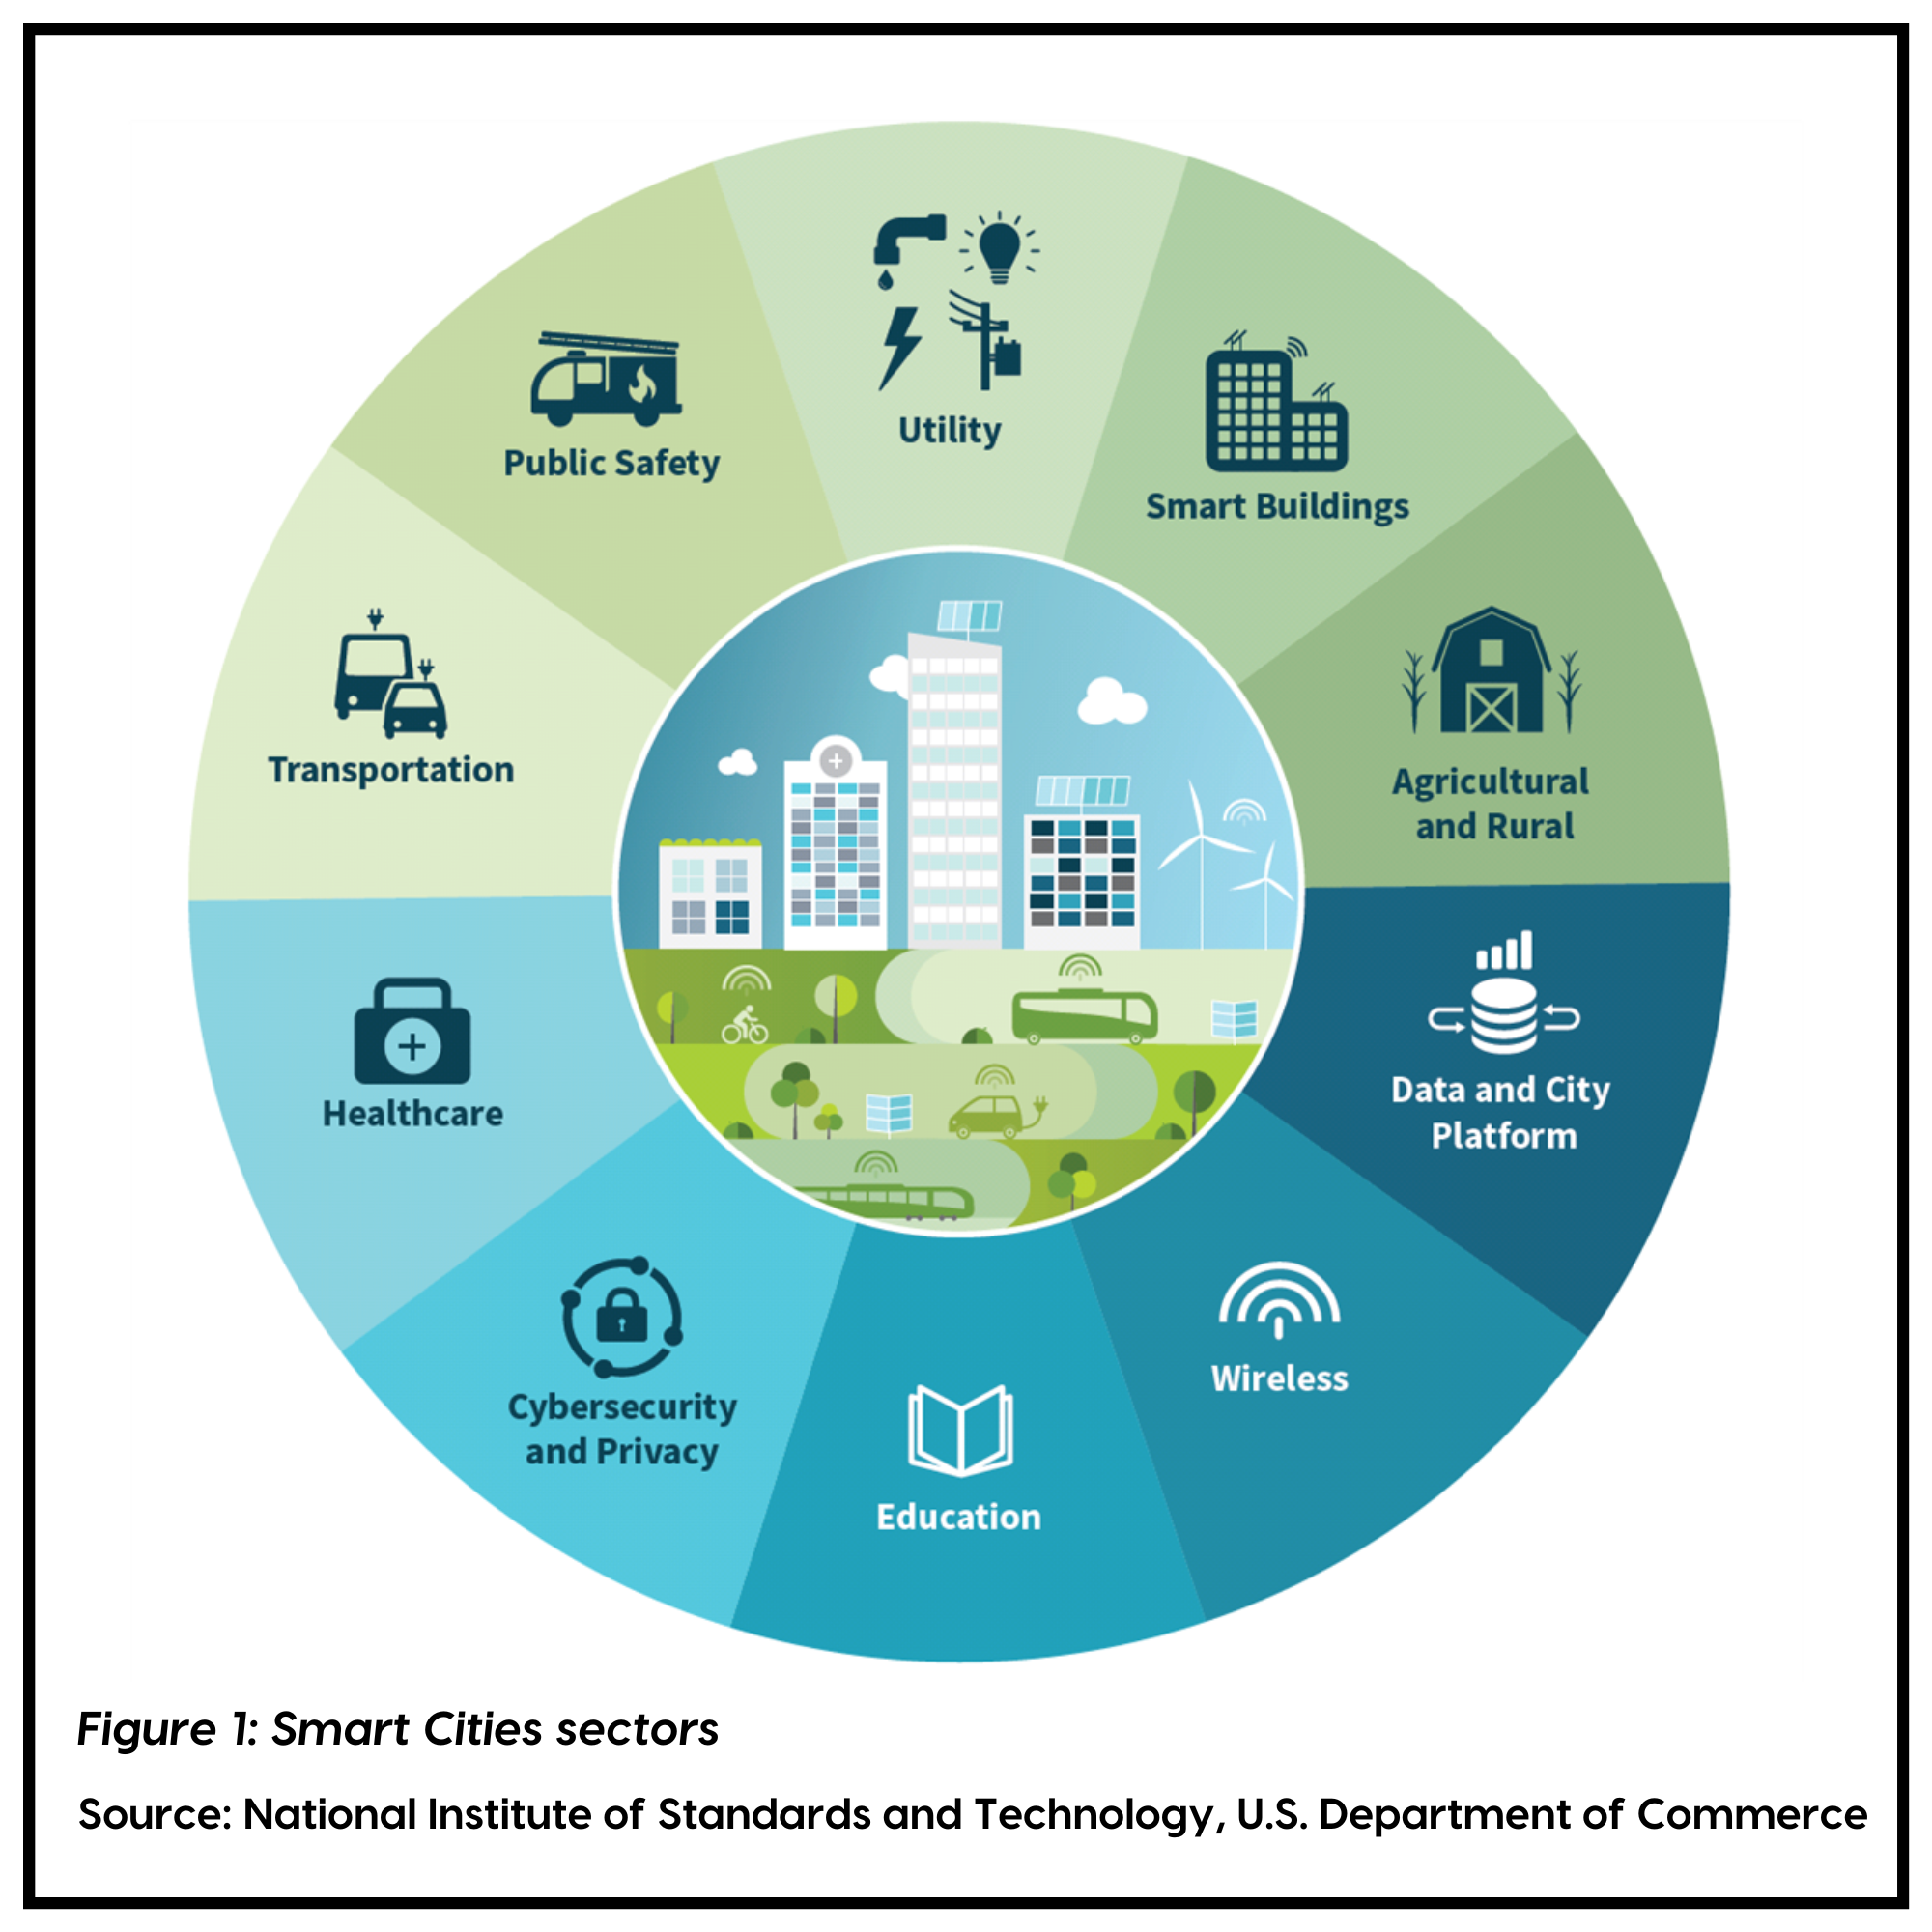 Figure 1: Smart Cities sectors. Utility; Smart Buildings; Agricultural and Rural; Data and City Platform; Wireless; Education; Cybersecurity and Privacy; Healthcare; Transportation; and Public Safety. Image source: National Institute of Standards and Technology, U.S. Department of Commerce